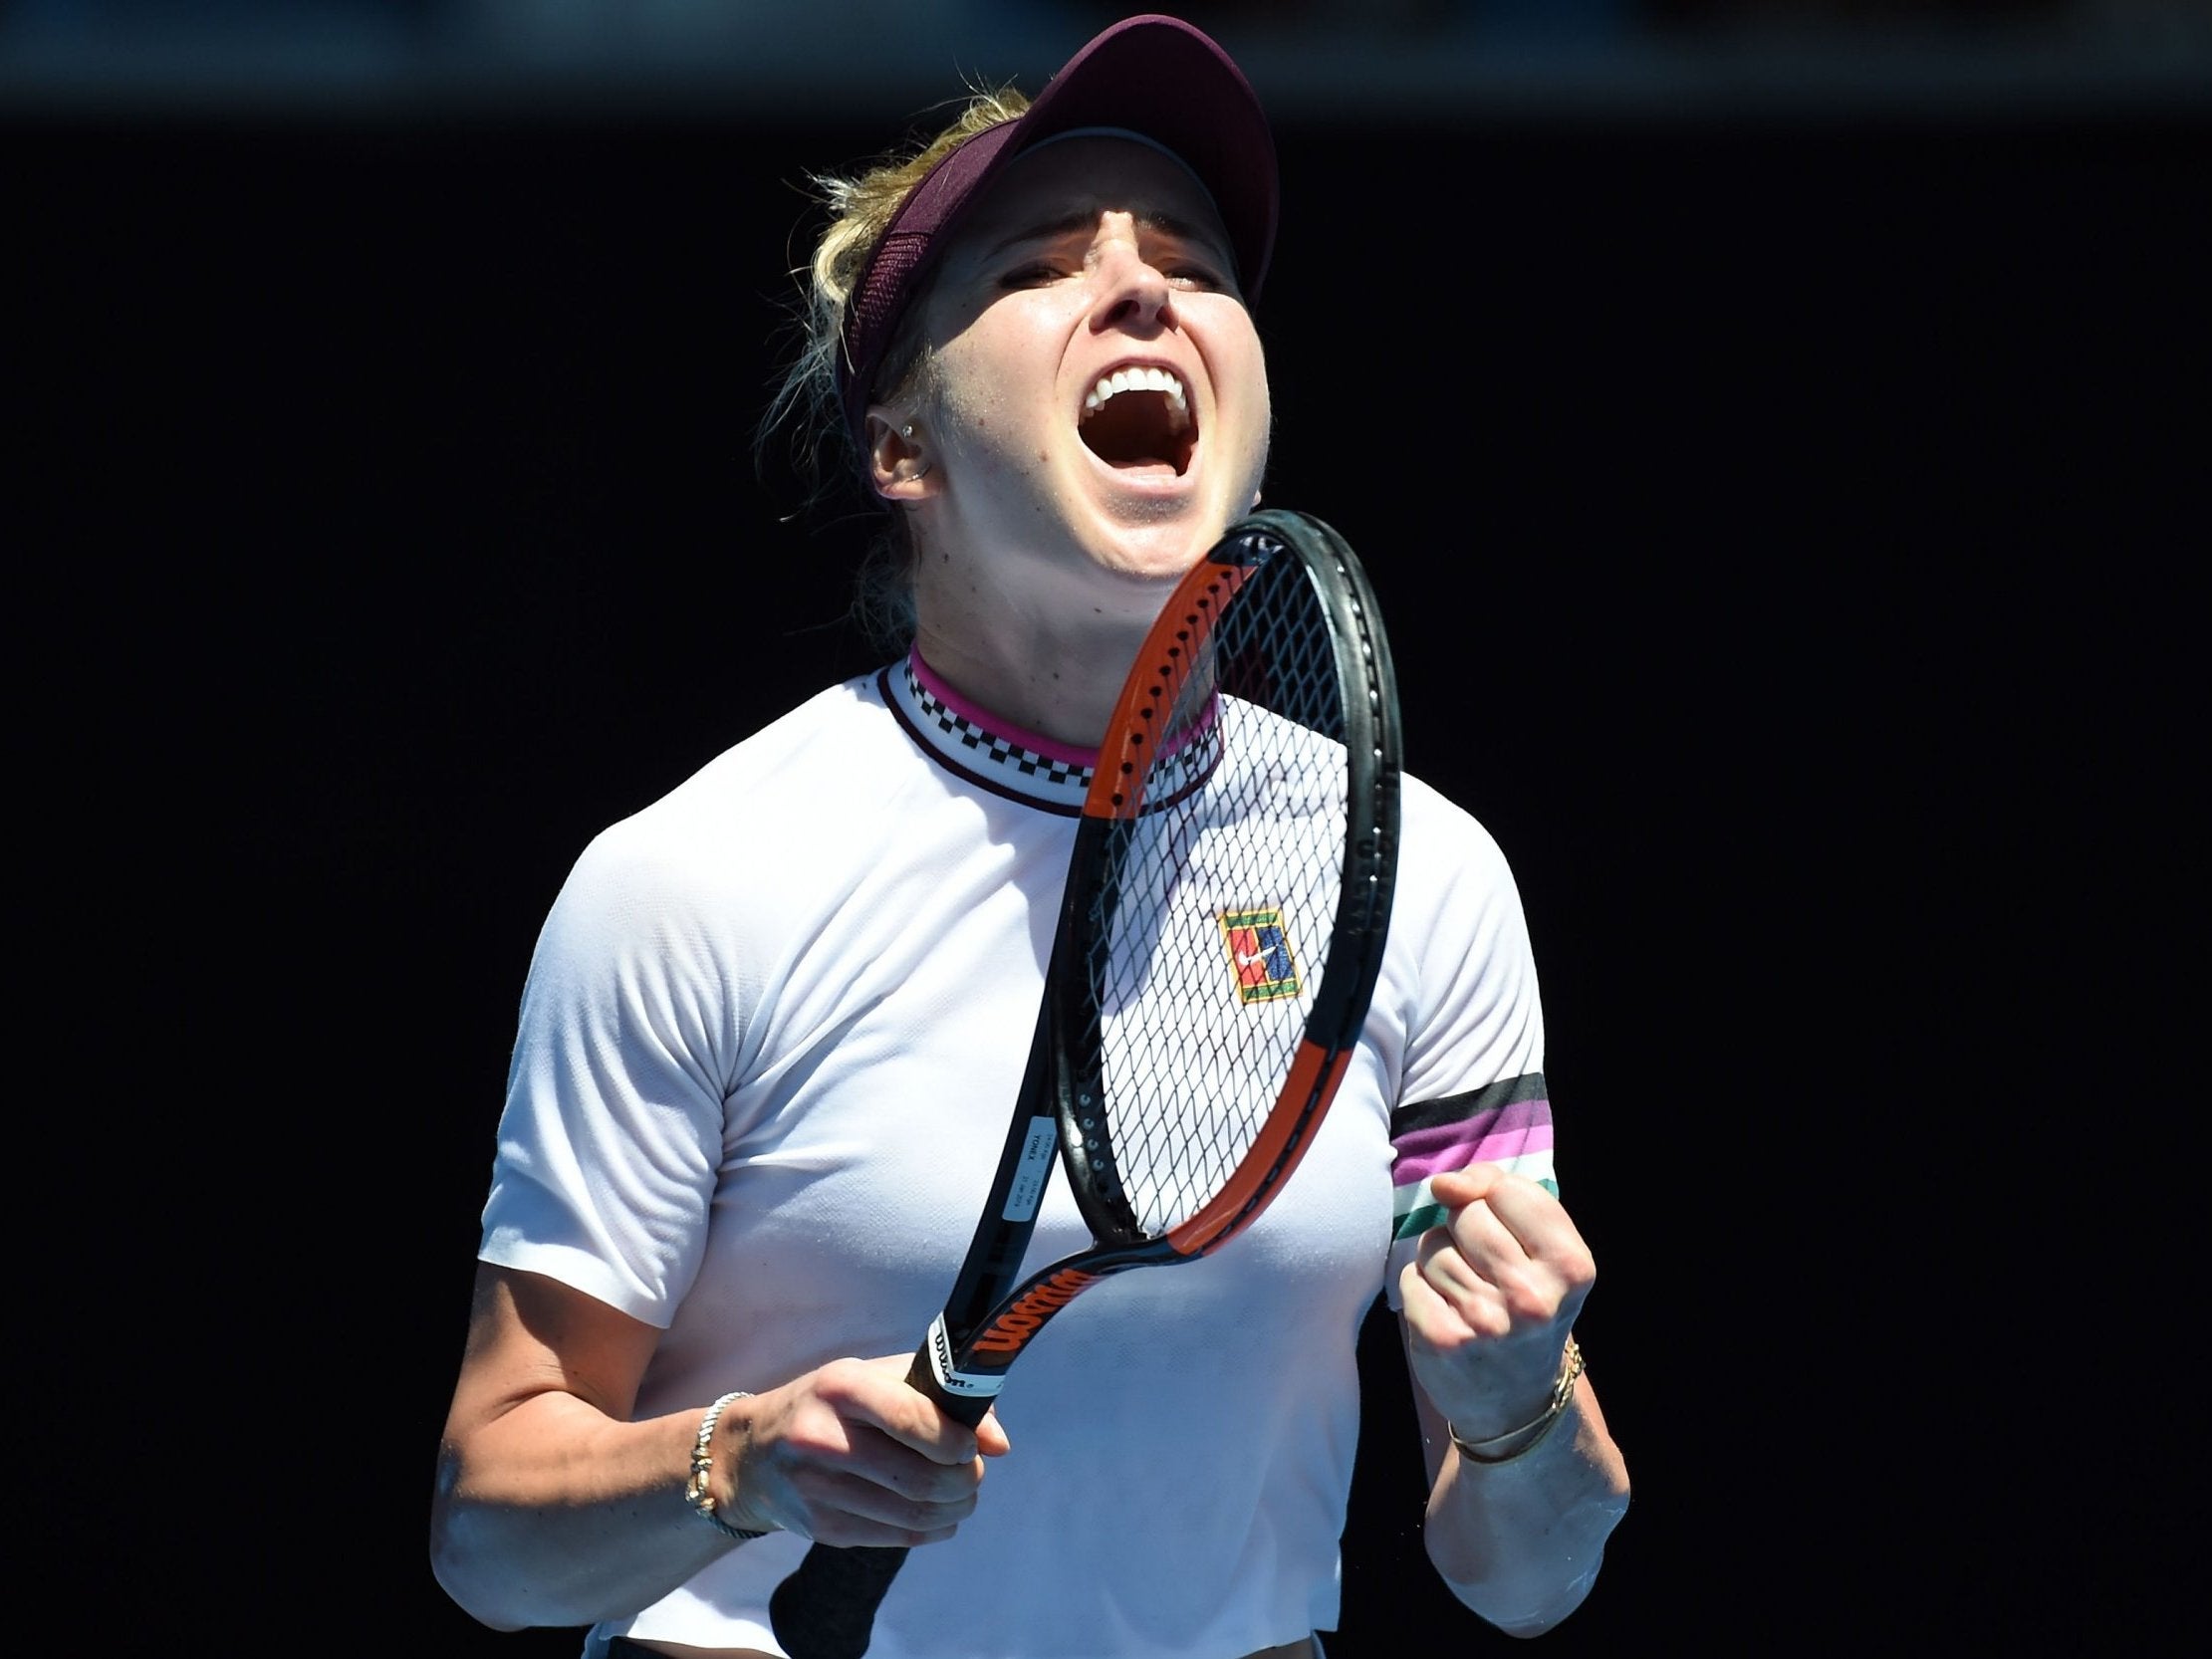 Australian Open 2019 Elina Svitolina riding a wave of momentum after WTA Finals proved she can compete The Independent The Independent